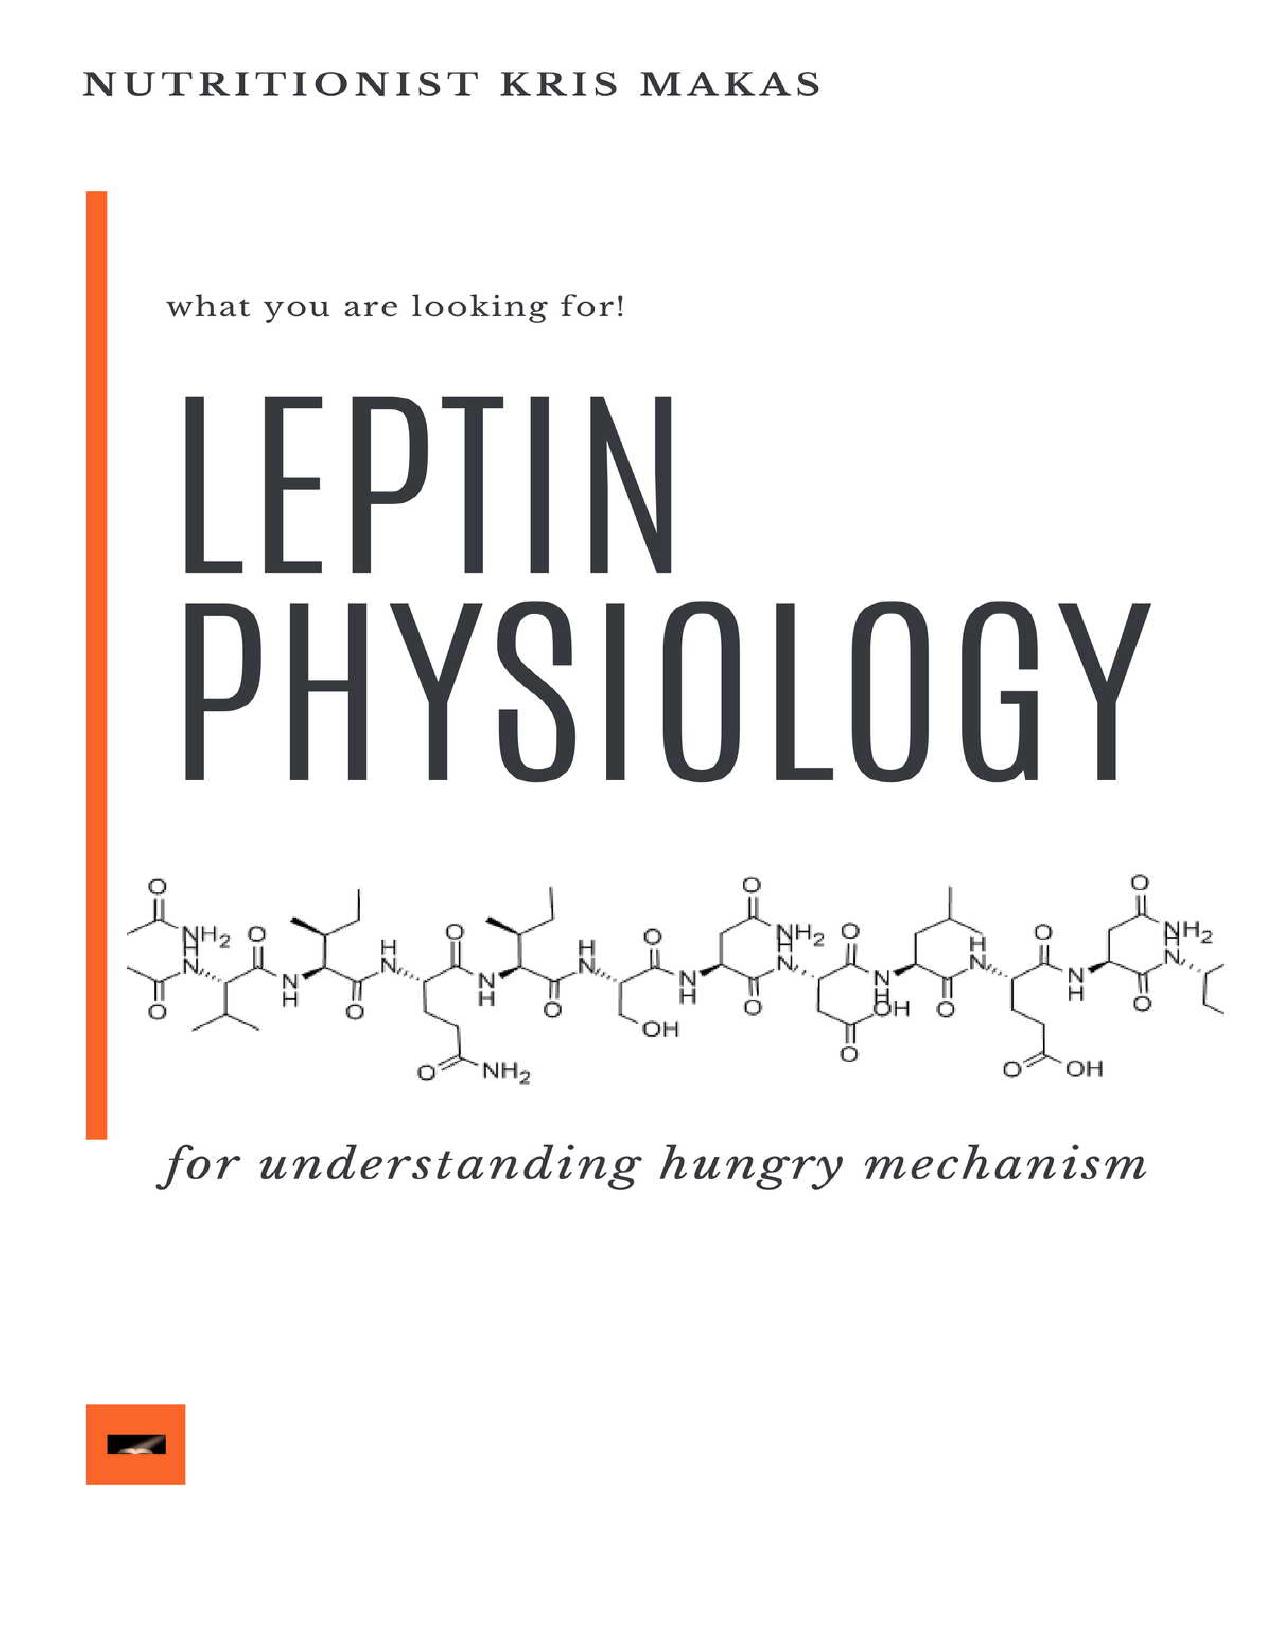 LEPTIN PHYSIOLOGY: Designed by a dietician to understand your hunger mechanism and get professional help on it. (Health & Nutrition Book 1)